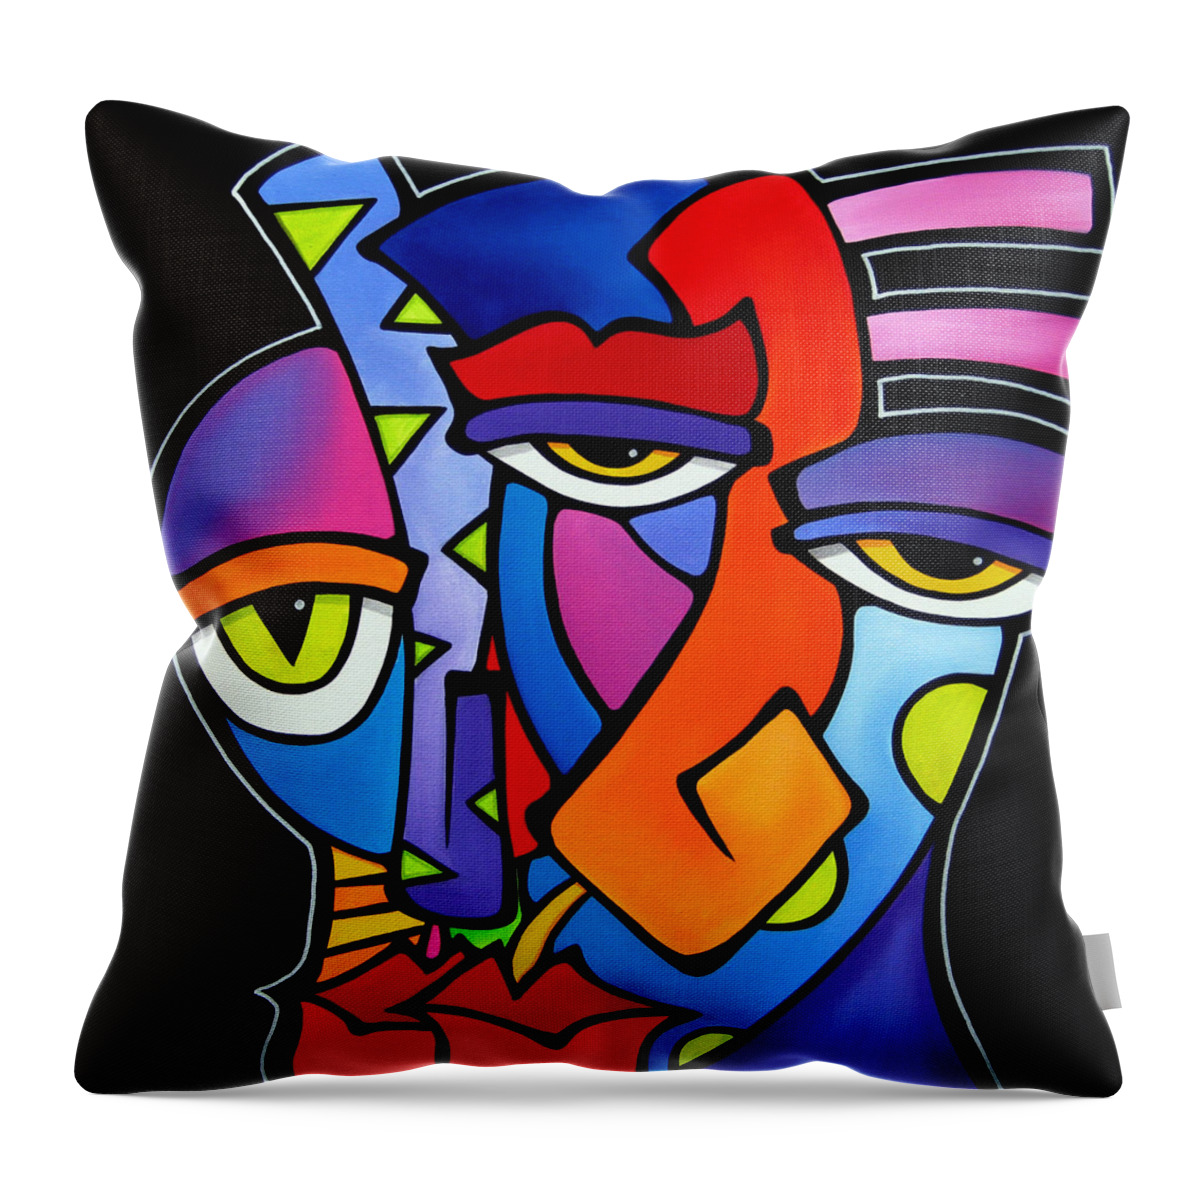 Pop Art Throw Pillow featuring the painting A Moment - Original Abstract Art by Tom Fedro